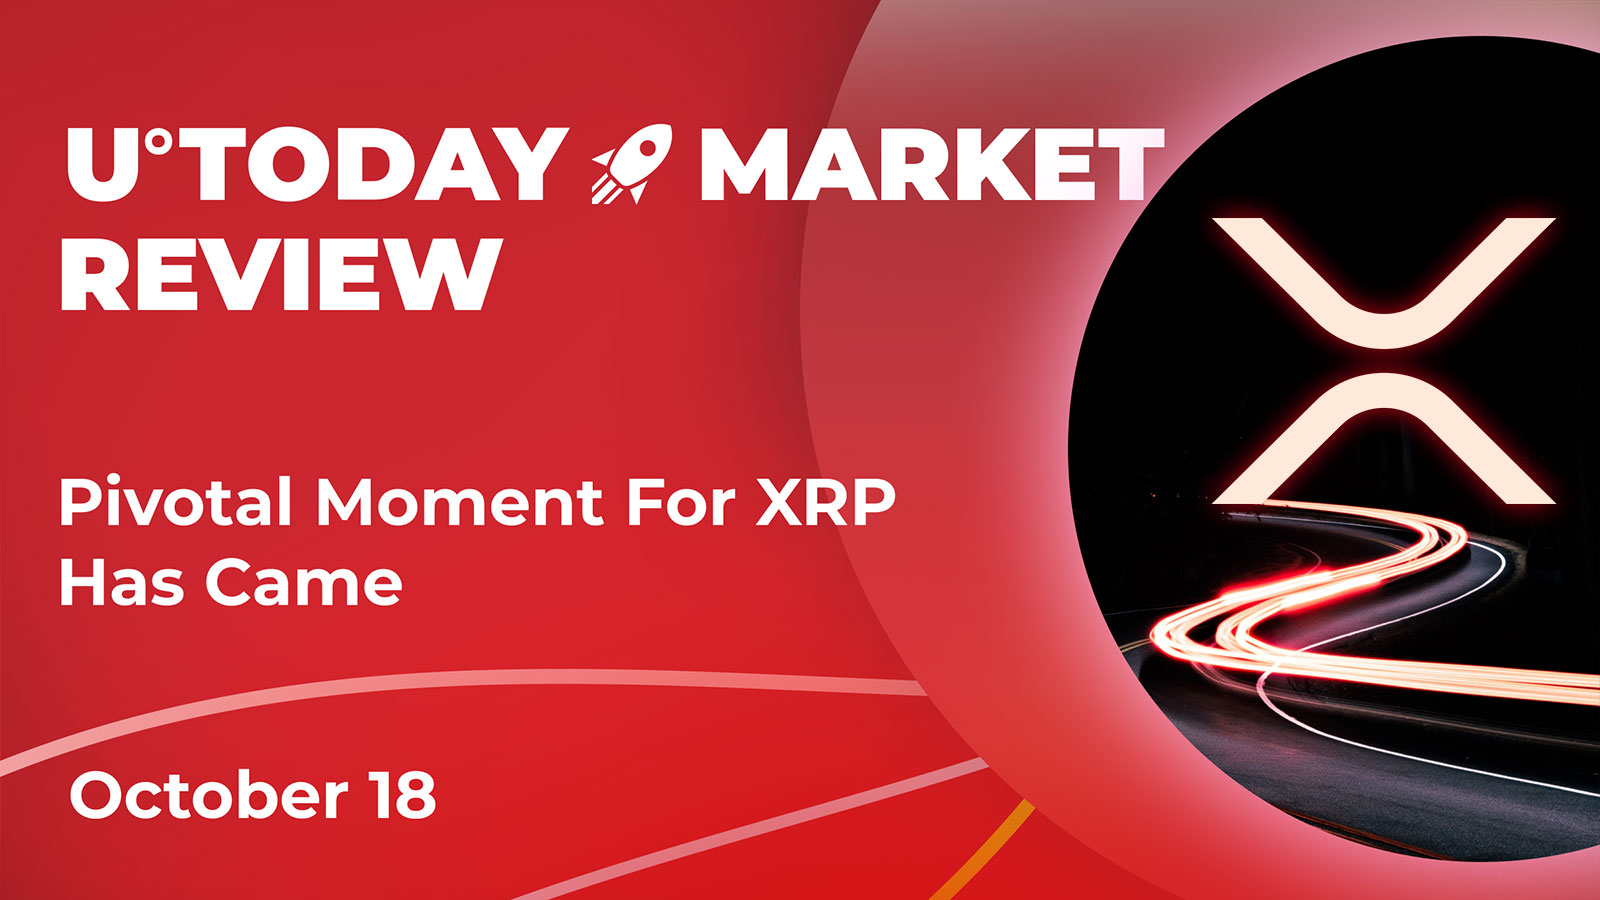 Pivotal Moment For XRP Has Came: Crypto Market Review, October 18